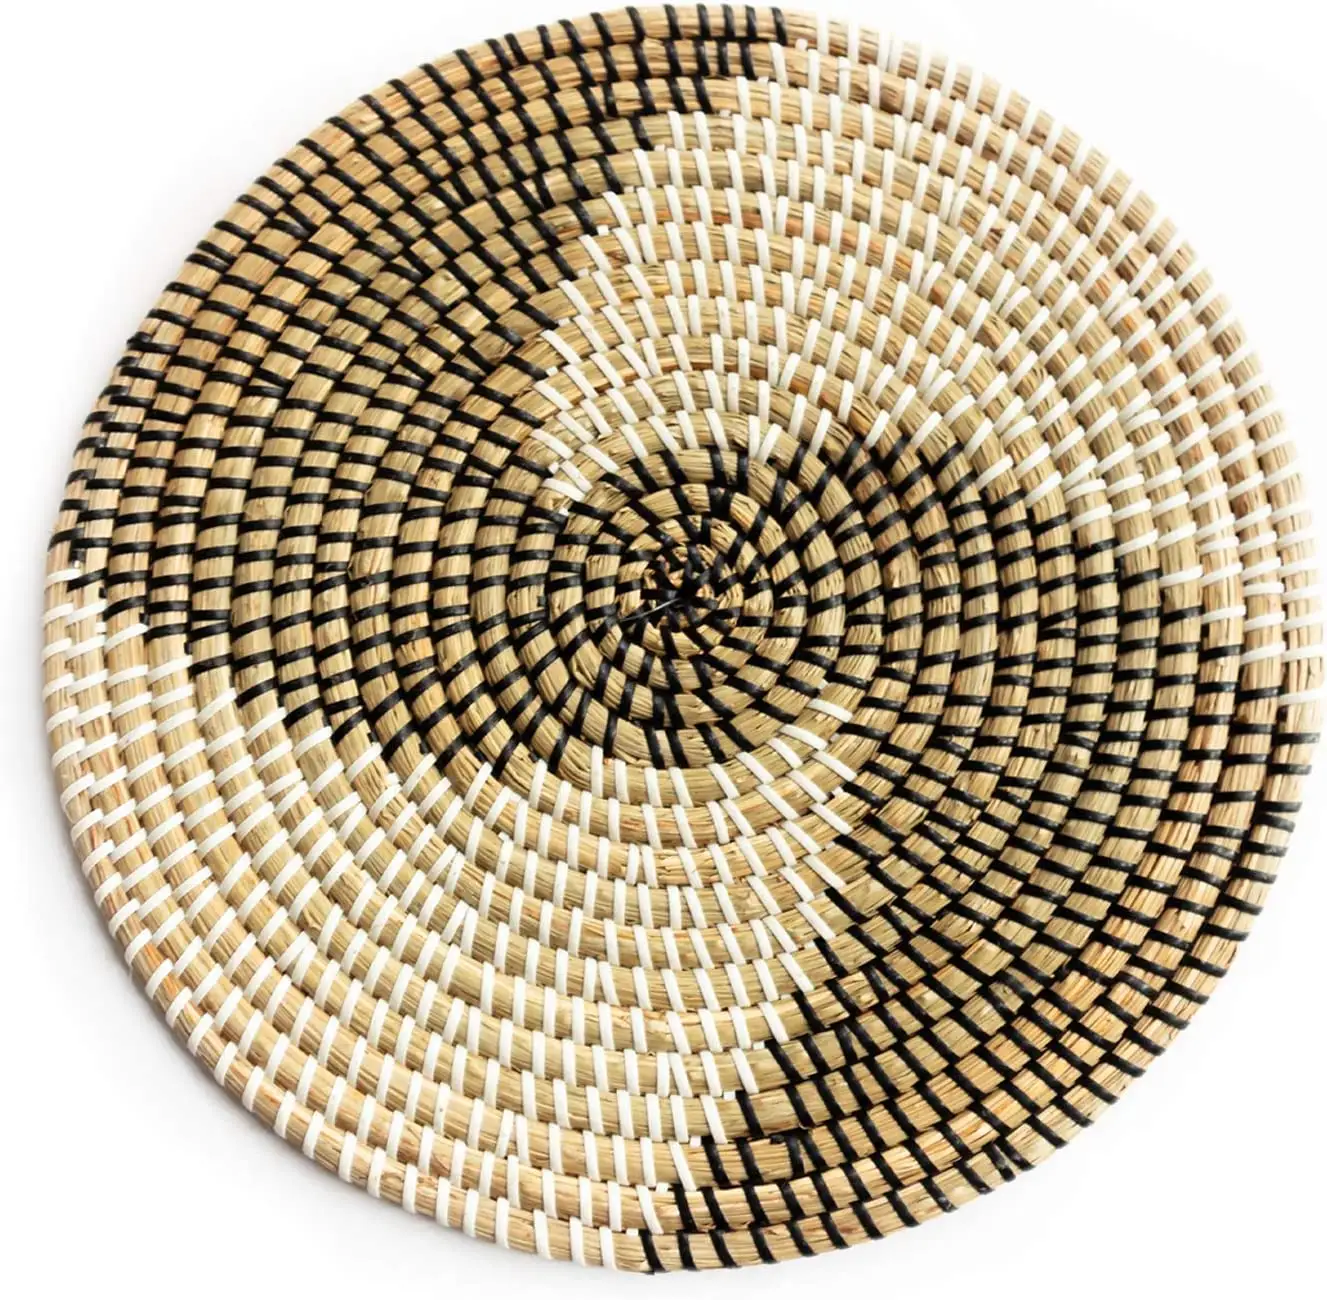 Rattan Wall Decor - Boho Wall Hanging Decorative Plate - Woven Trivets Handmade Placemats for Dining Table - Rattan Trivets